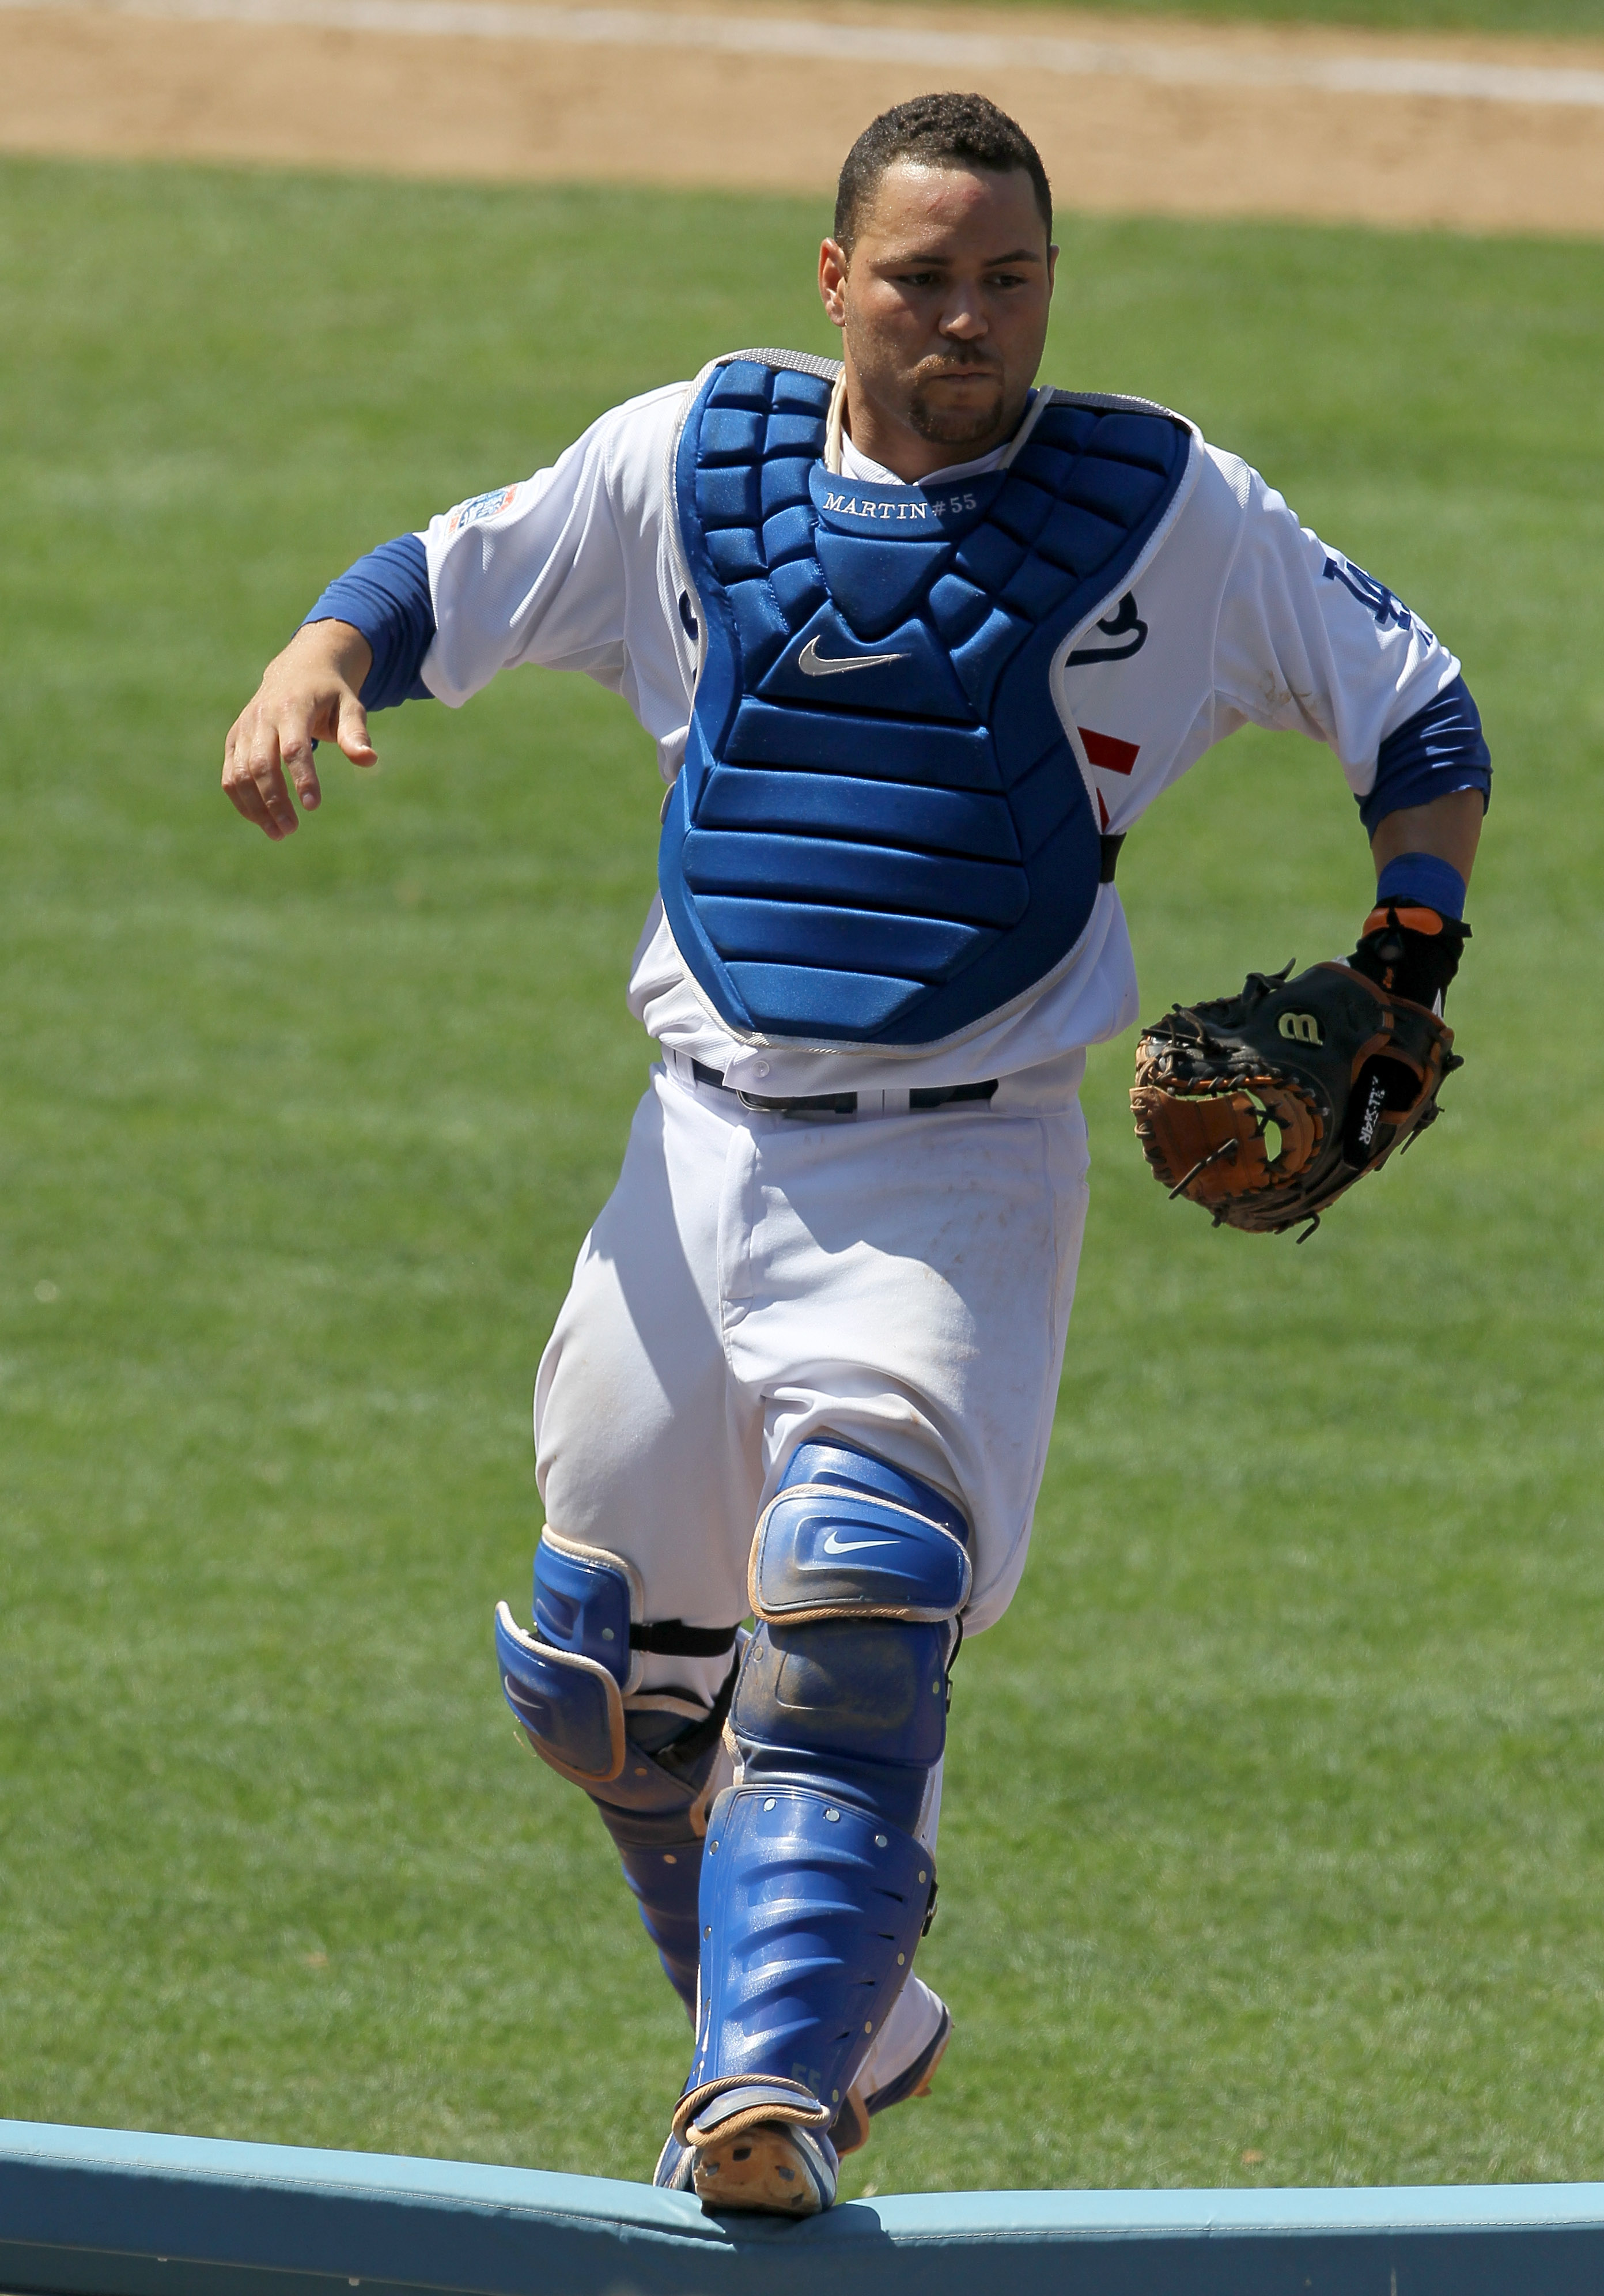 Los Angeles Dodgers: The overlooked impact of Russell Martin